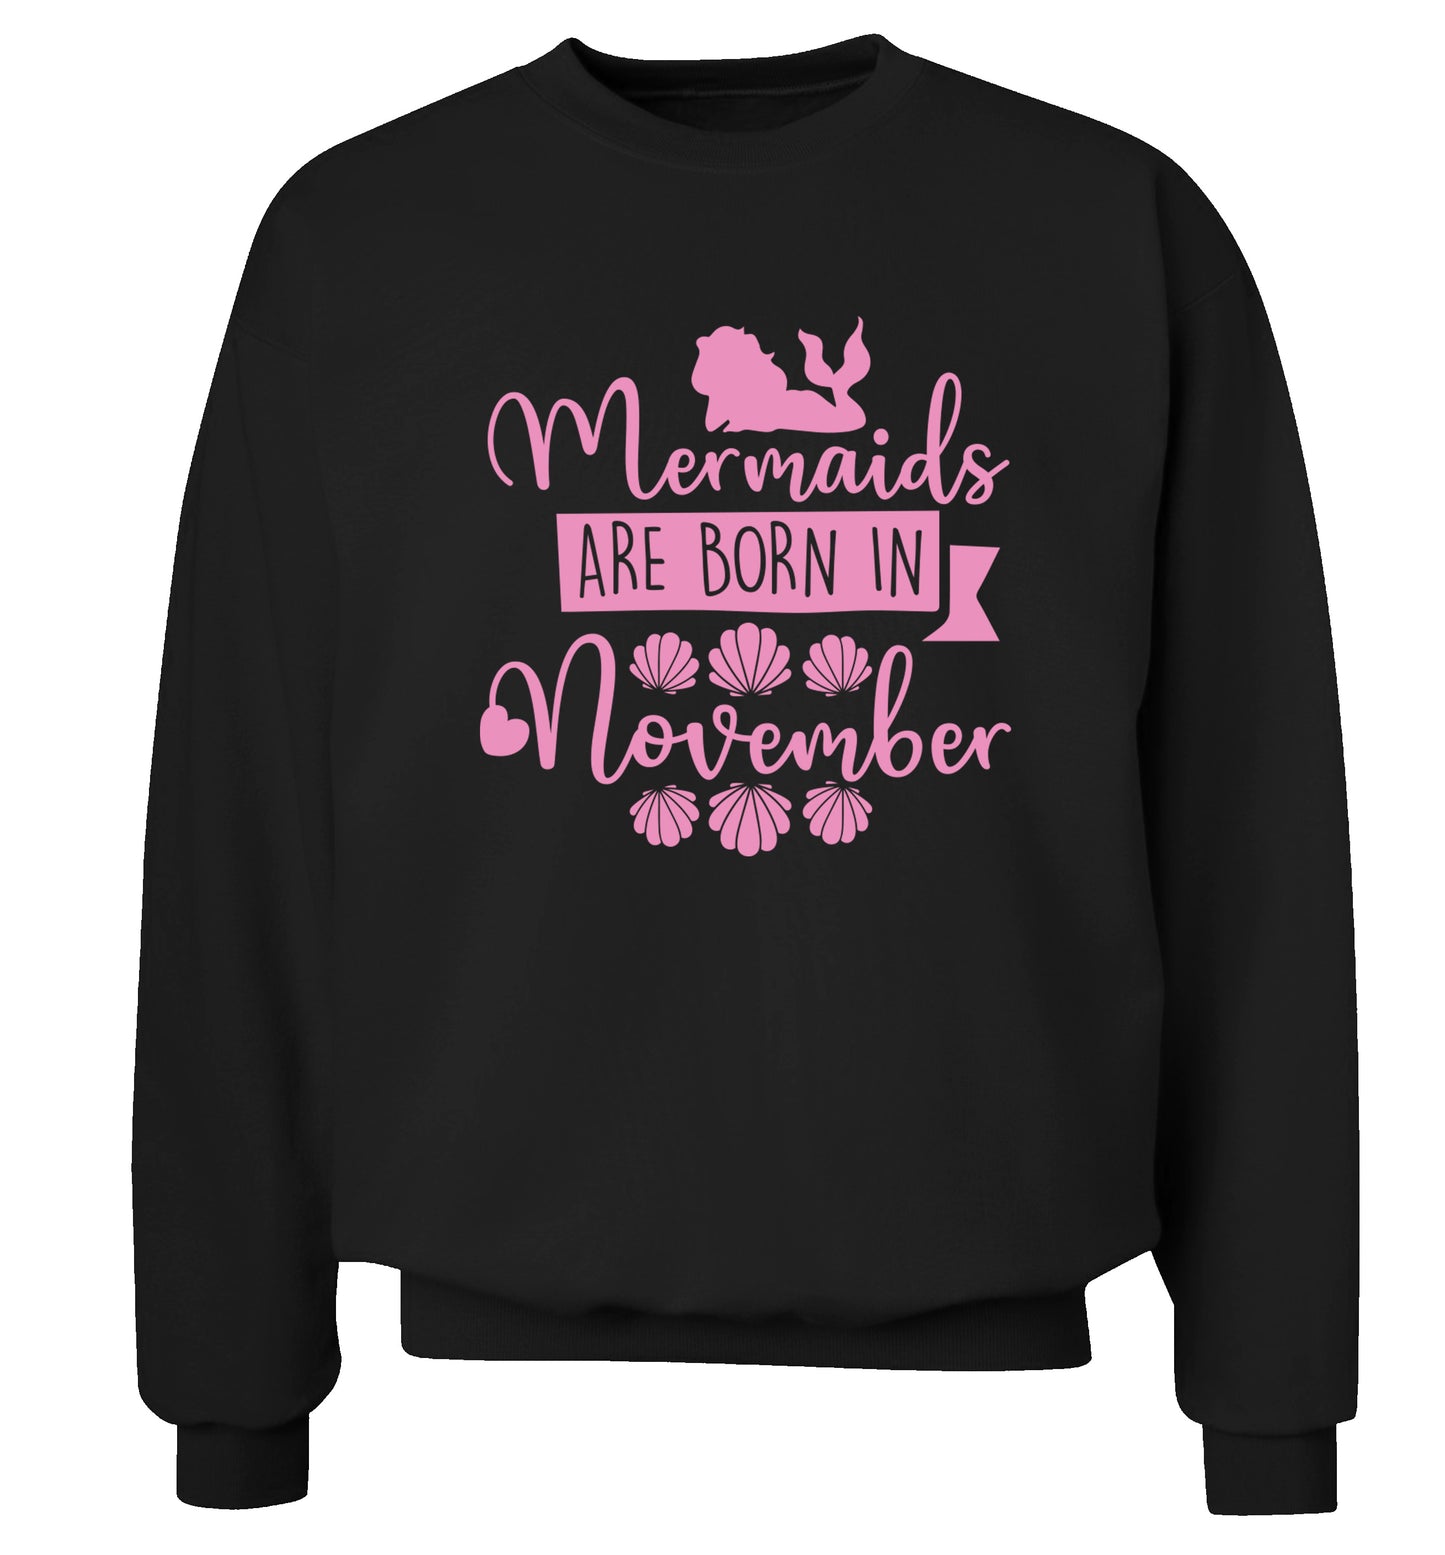 Mermaids are born in November Adult's unisex black Sweater 2XL